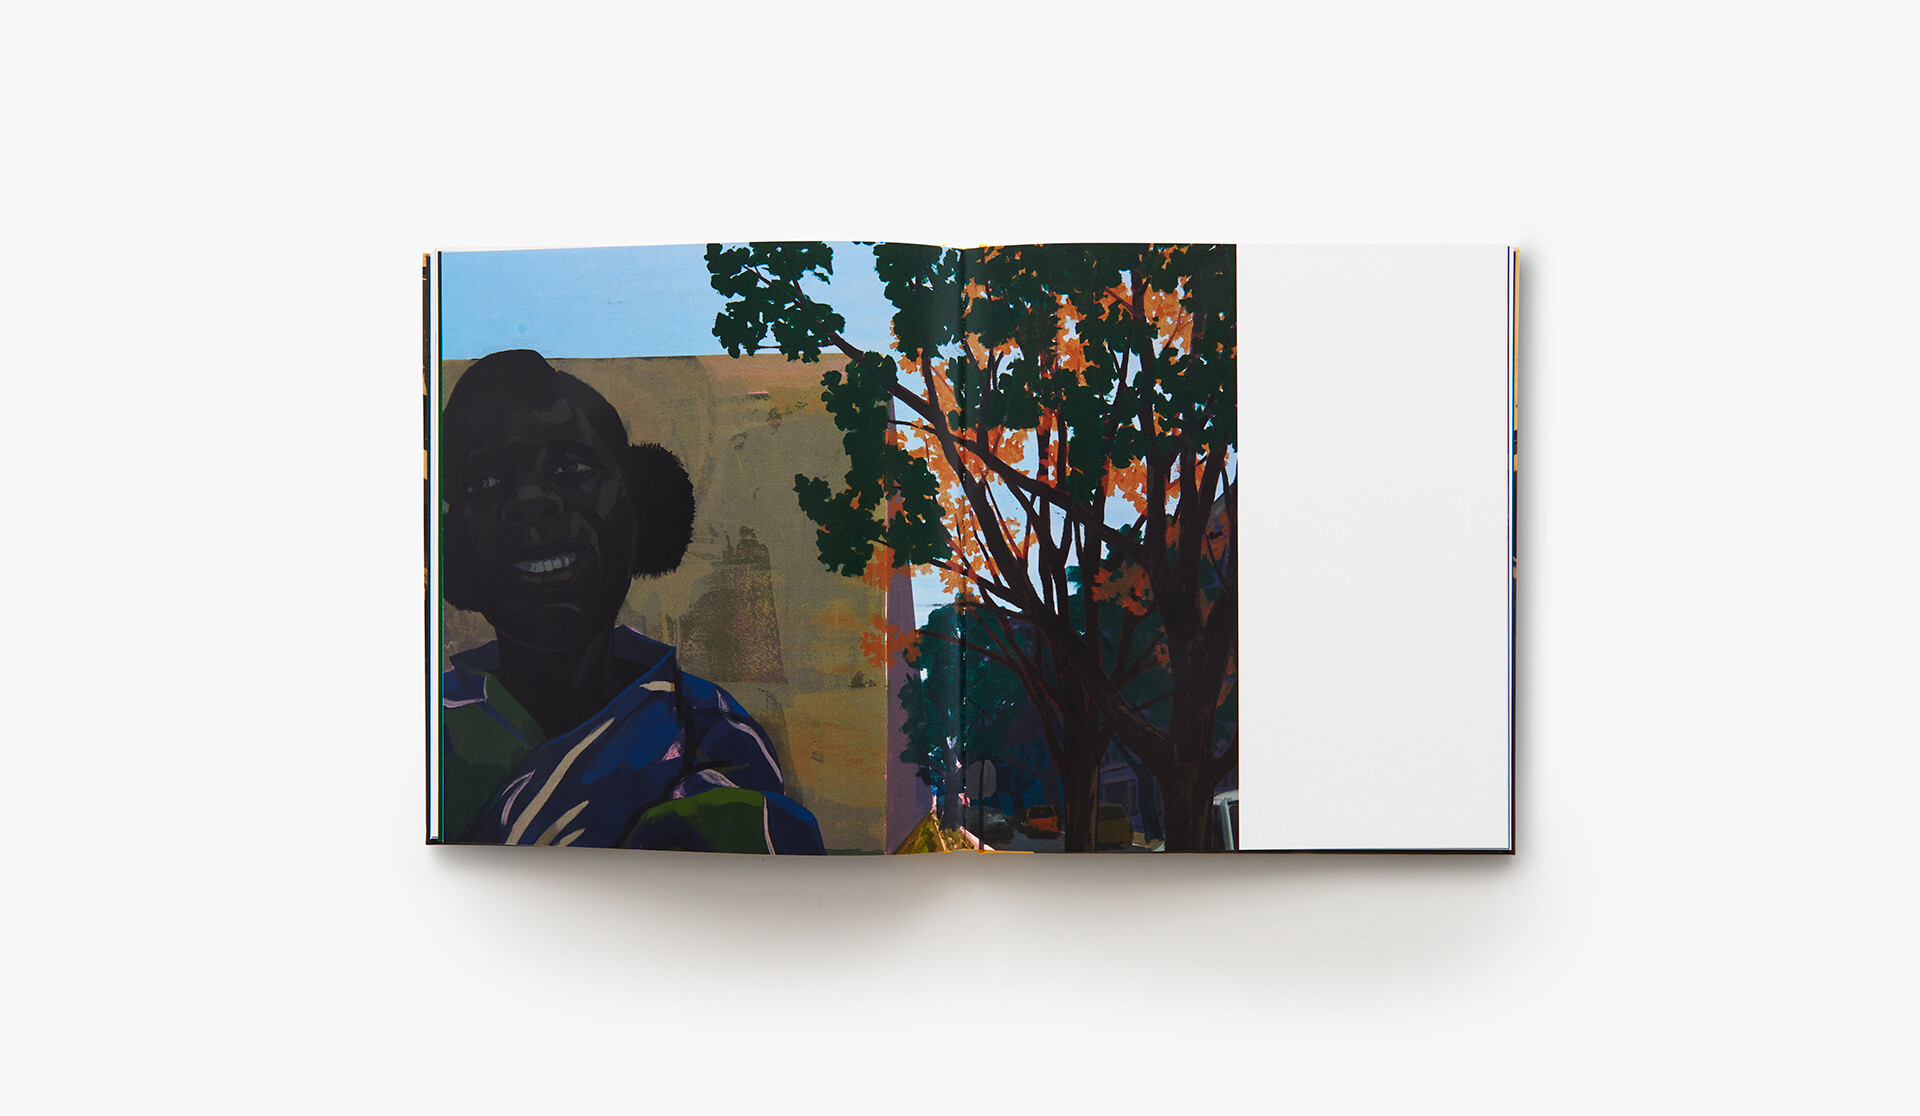 A photo of the book Kerry James Marshall: History of Painting, 2019.